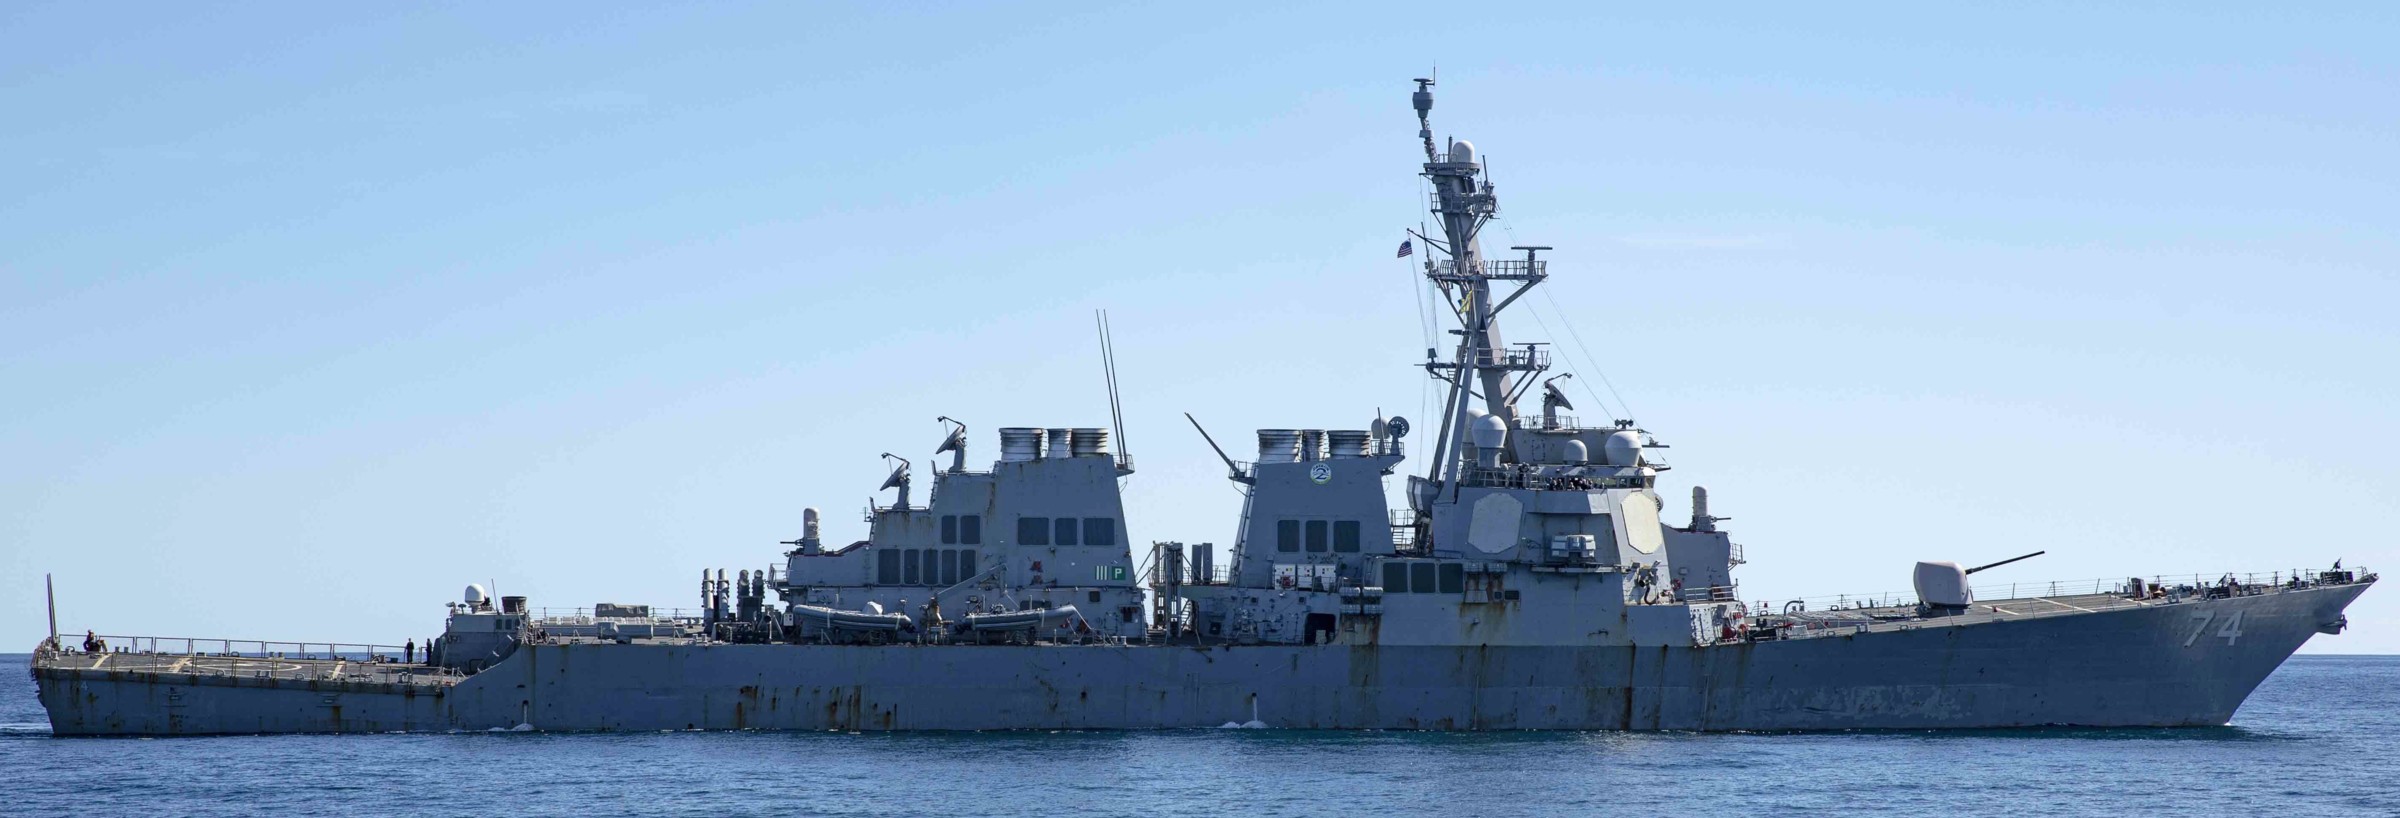 ddg-74 uss mcfaul guided missile destroyer arleigh burke class aegis us navy 74